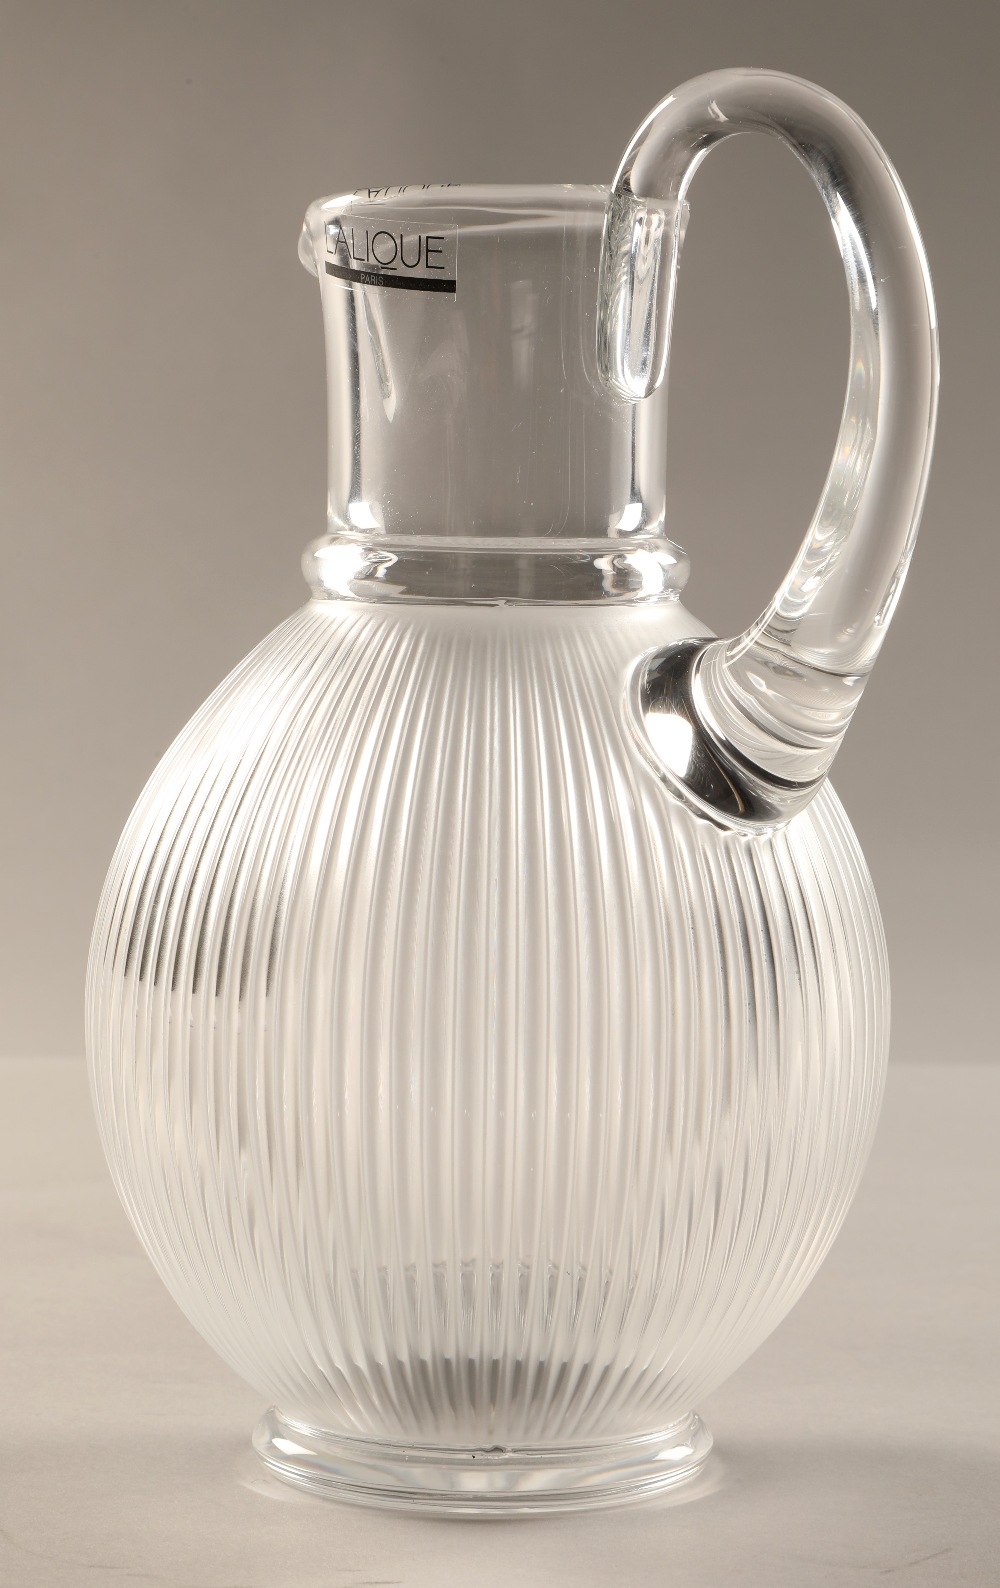 Lalique Langeais Pitcher, etched Lalique France to the base, 22 cm high, in Lalique box - Image 3 of 3